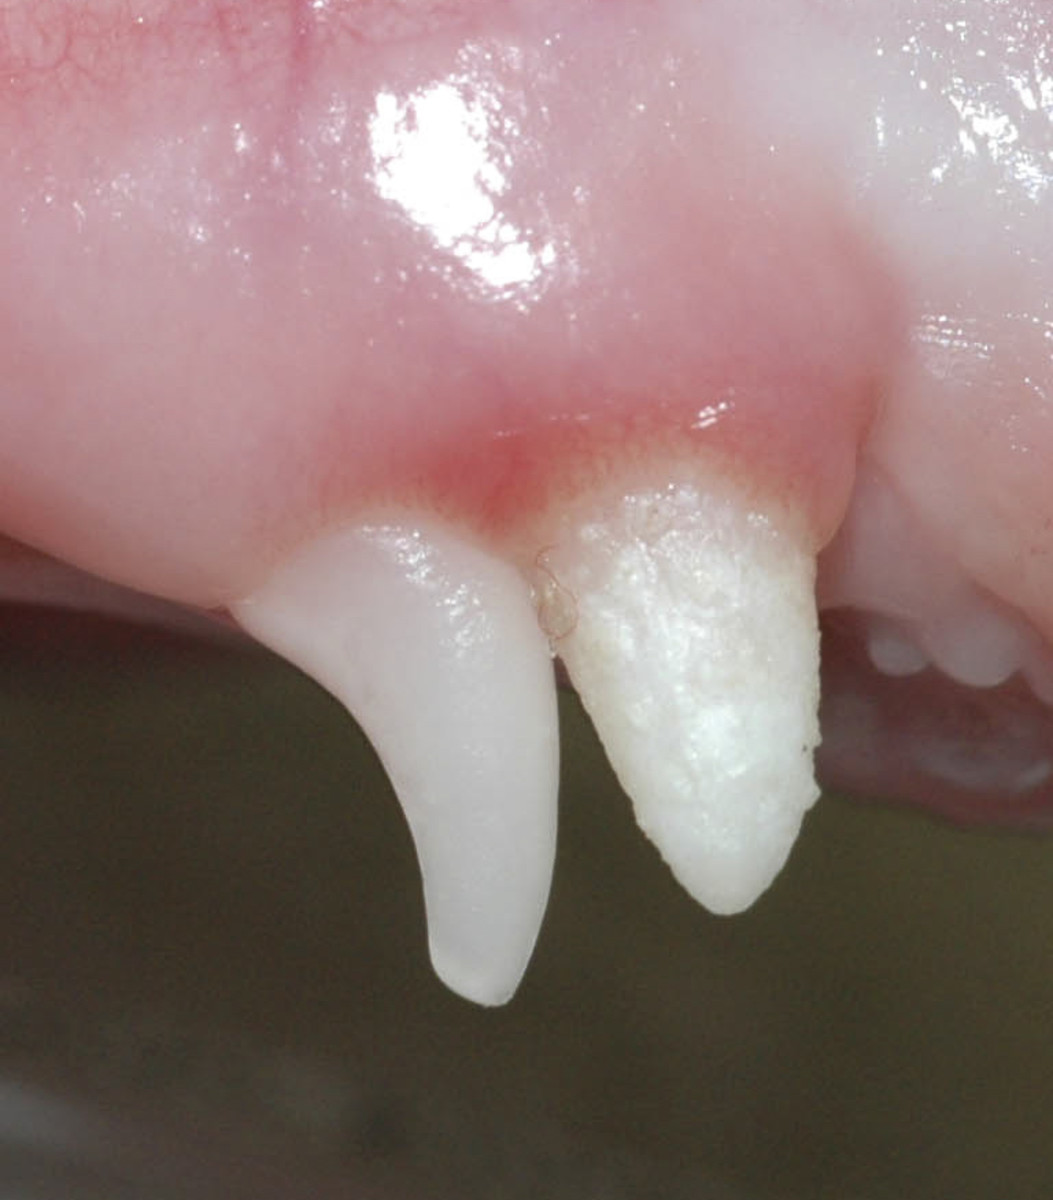 Retained puppy canine - note that the teeth are even closer together than normal teeth in a dogs mouth